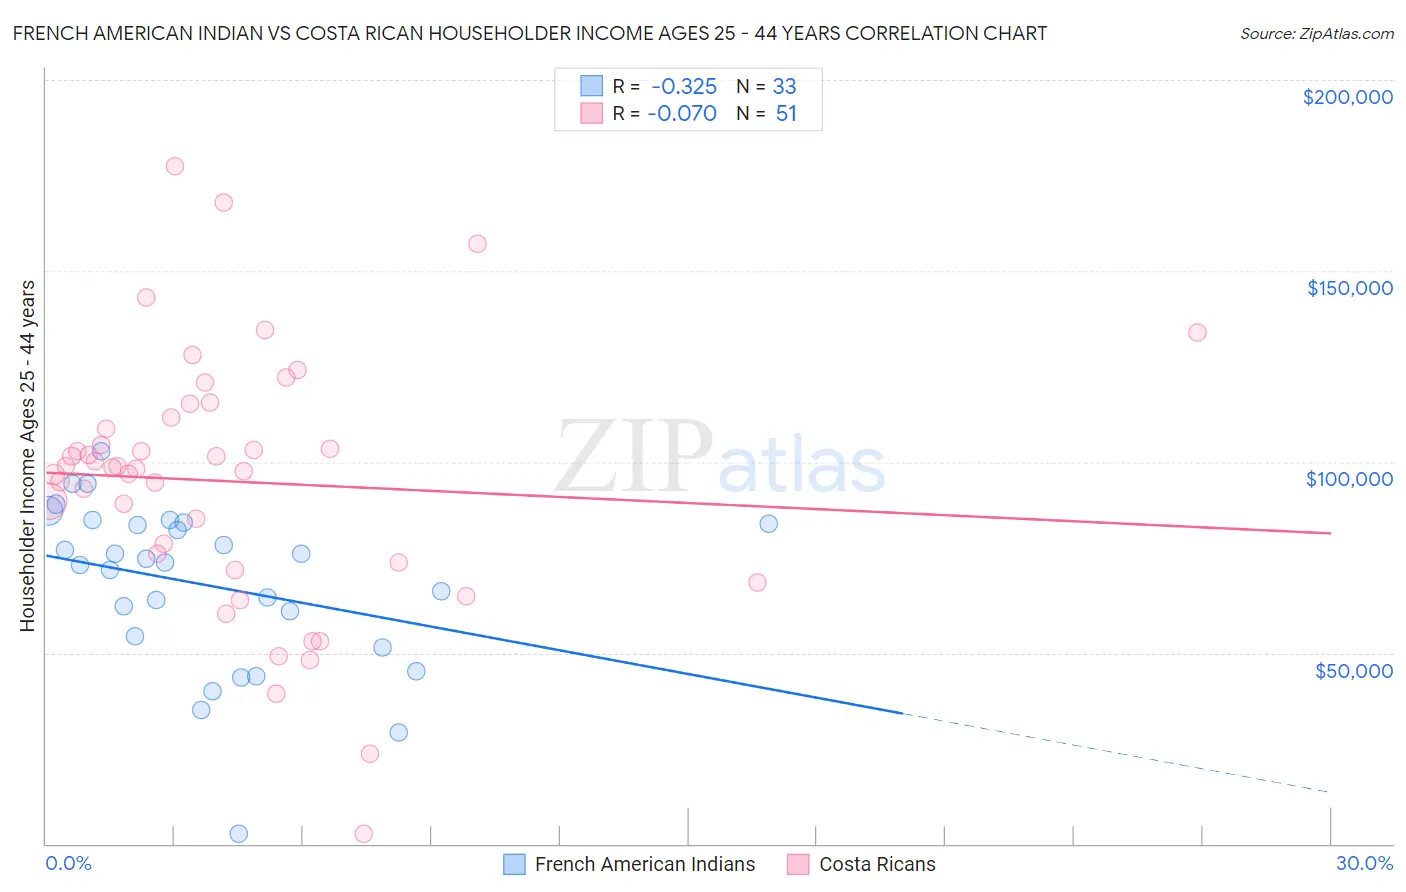 French American Indian vs Costa Rican Householder Income Ages 25 - 44 years